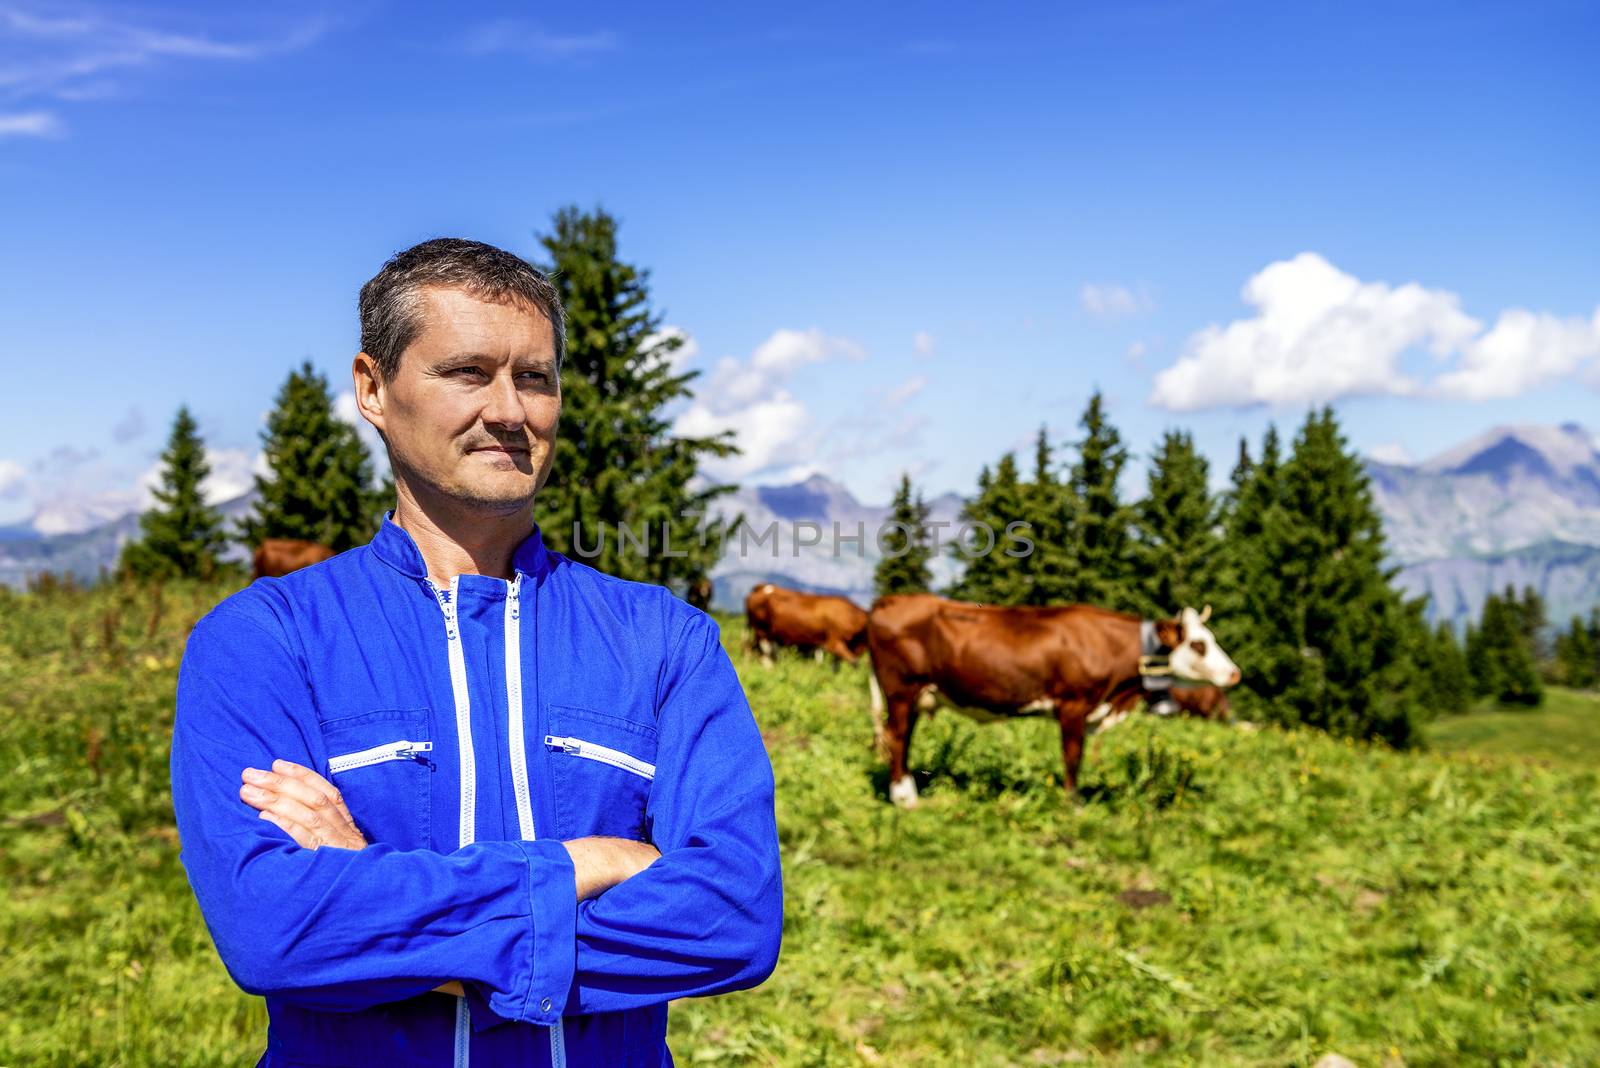 Herdsman standing in front of cows in alpine mountains